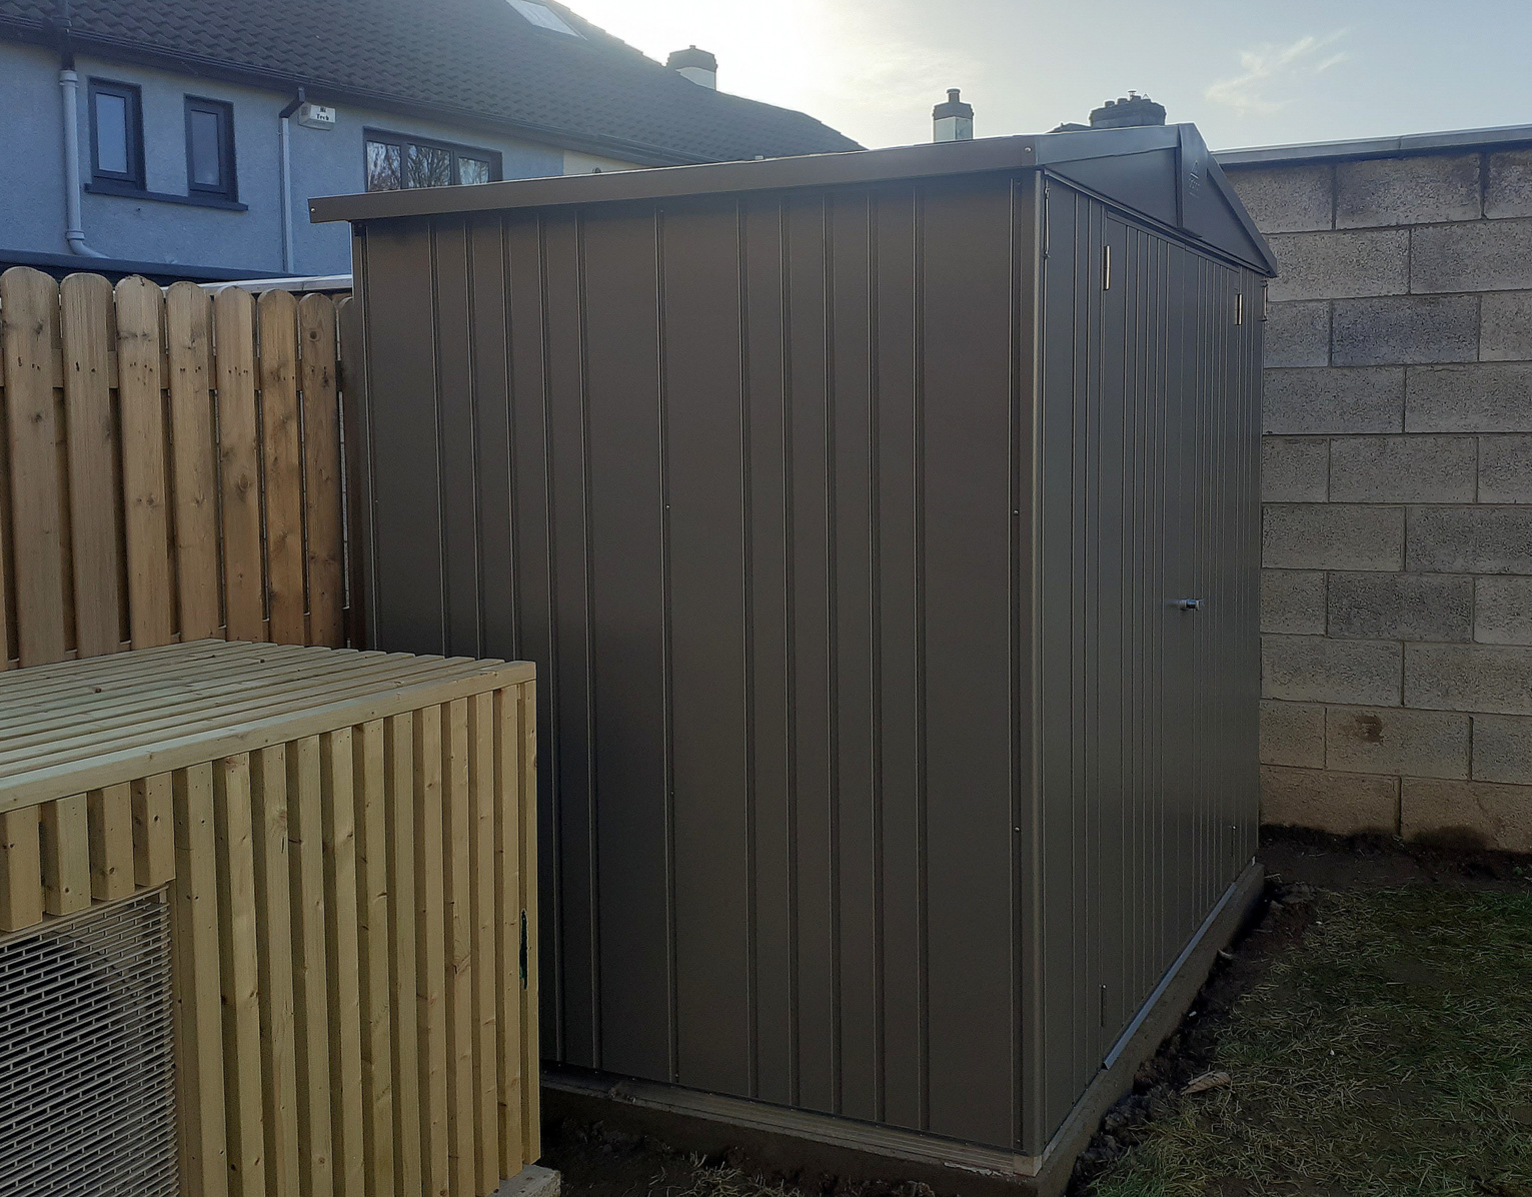 Biohort Europa Size 3 Garden Shed, in metallic quartz grey, supplied + fitted in Templeogue, Dublin 6W by Owen Chubb Landscapers